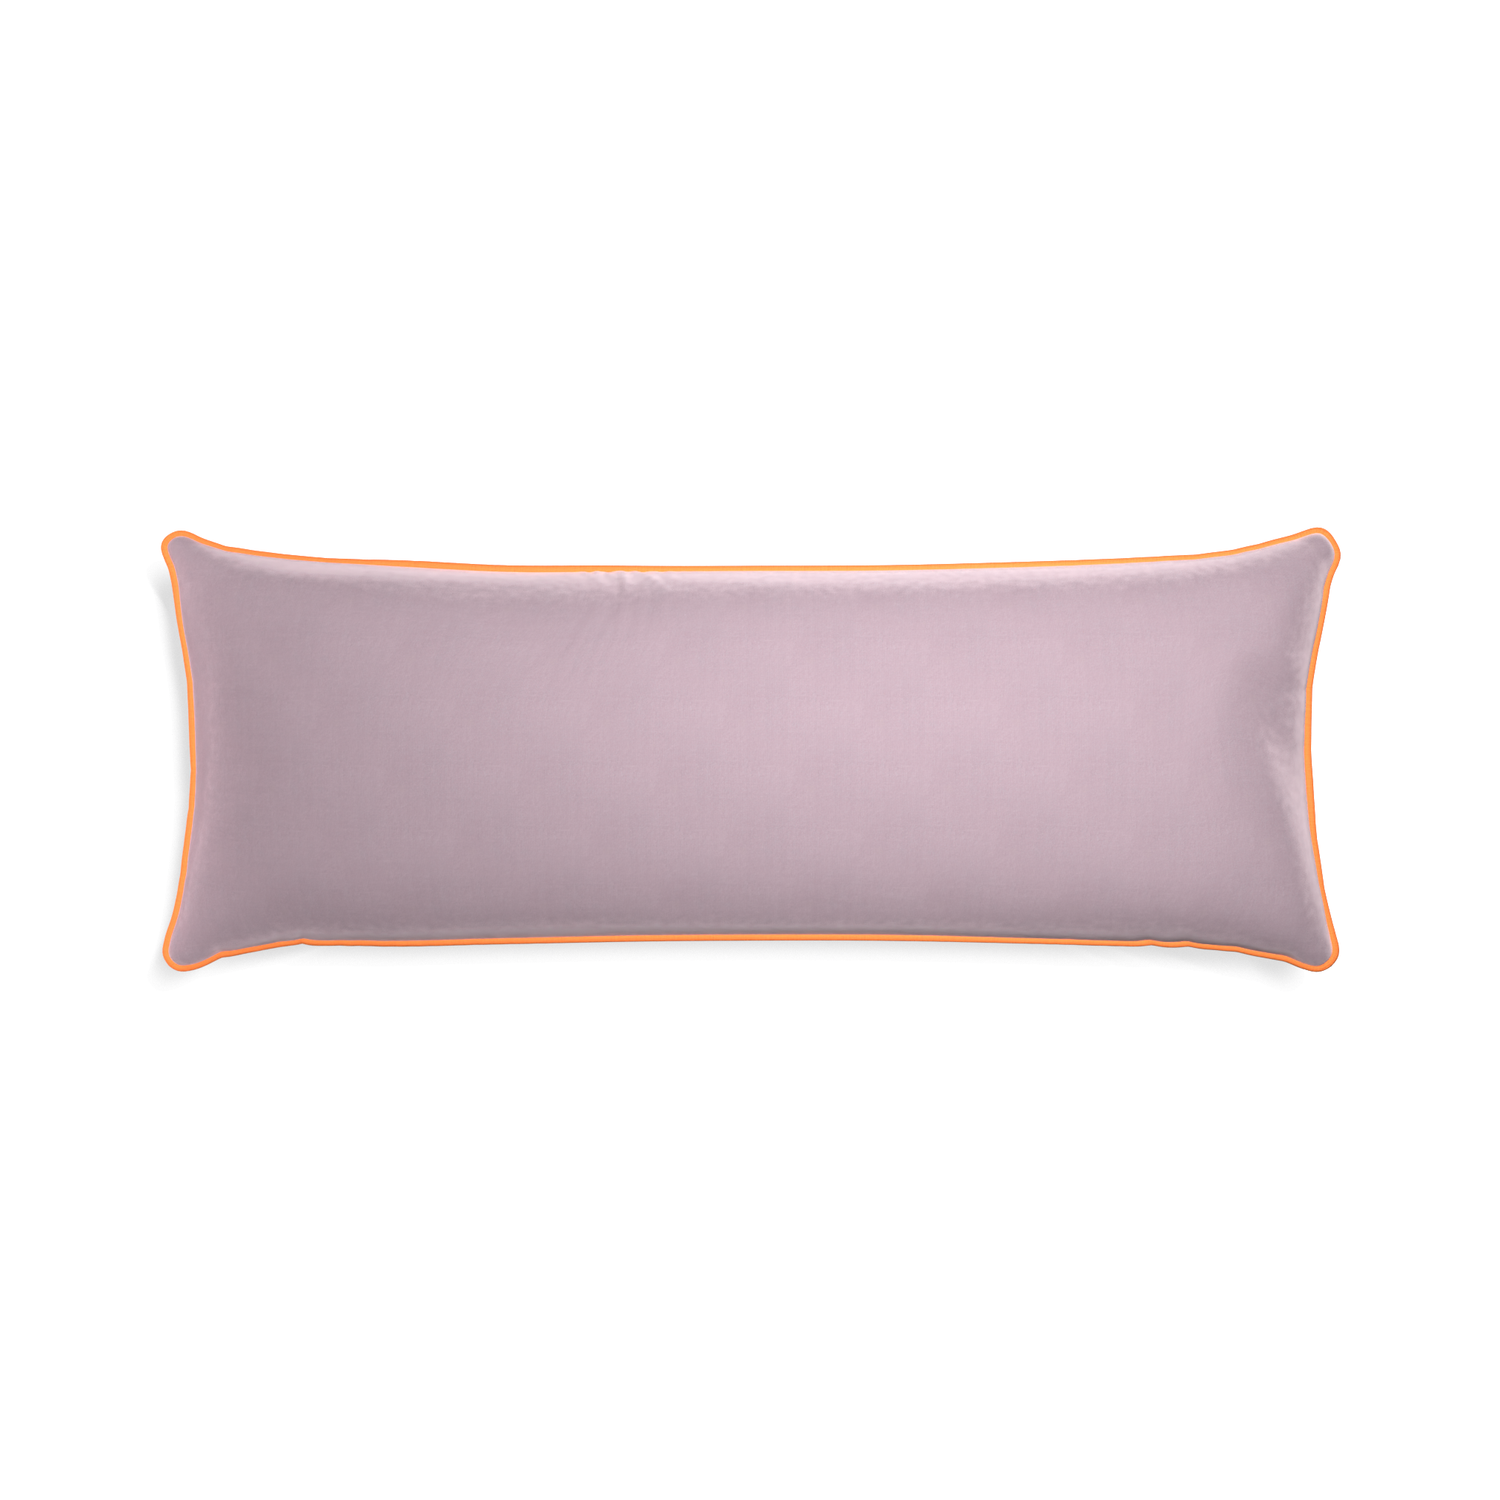 Xl-lumbar lilac velvet custom lilacpillow with clementine piping on white background